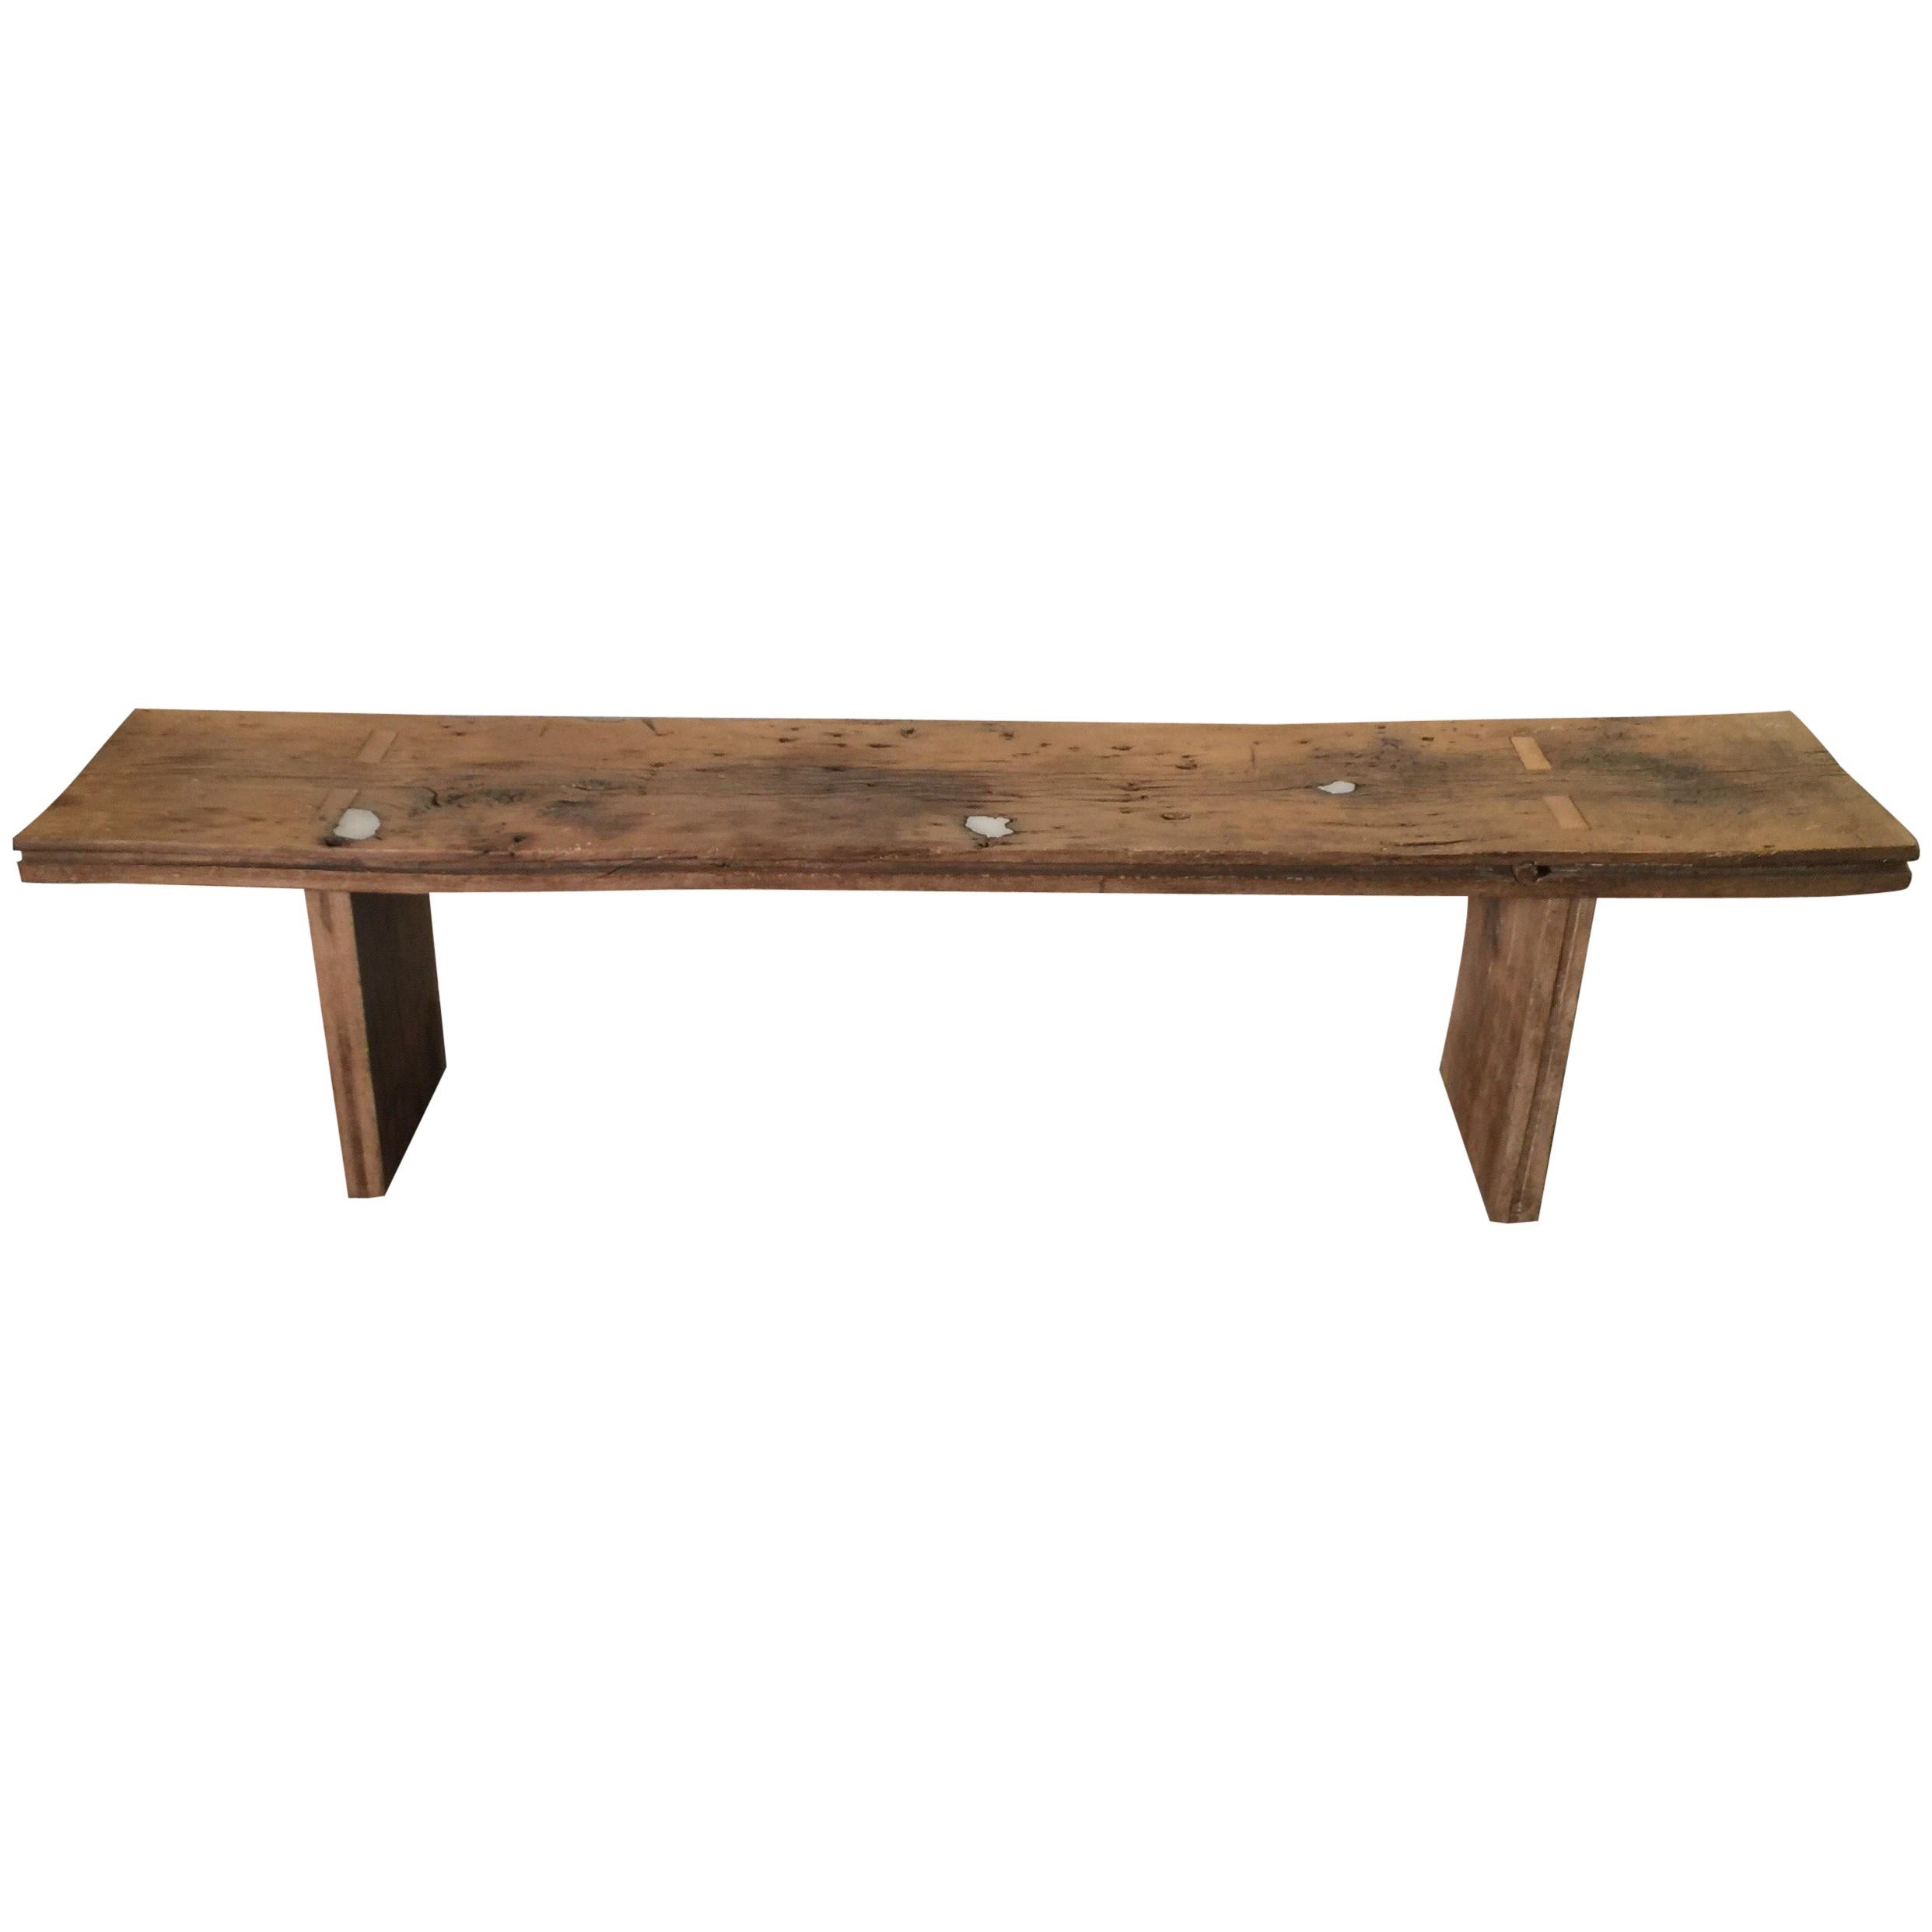 Well Designed Primitive Industrial Coffee Table Bench